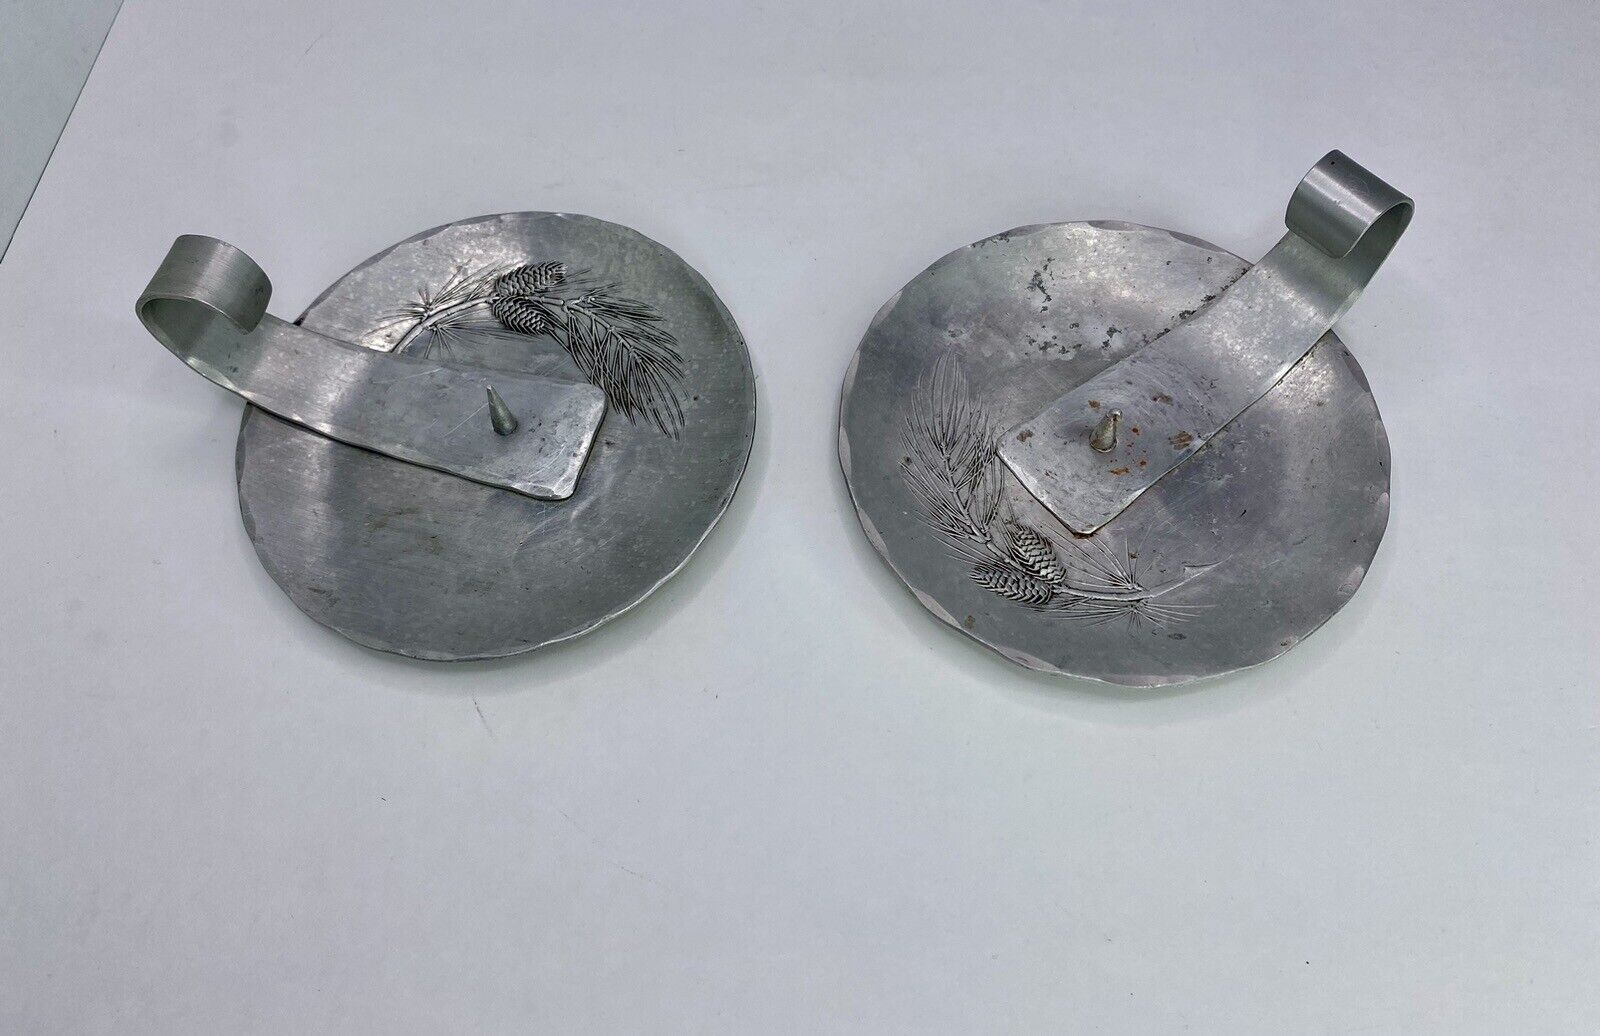 WENDELL AUGUST FORGE PAIR 2 CANDLE HOLDERS ALUMINUM GROVE CITY PA